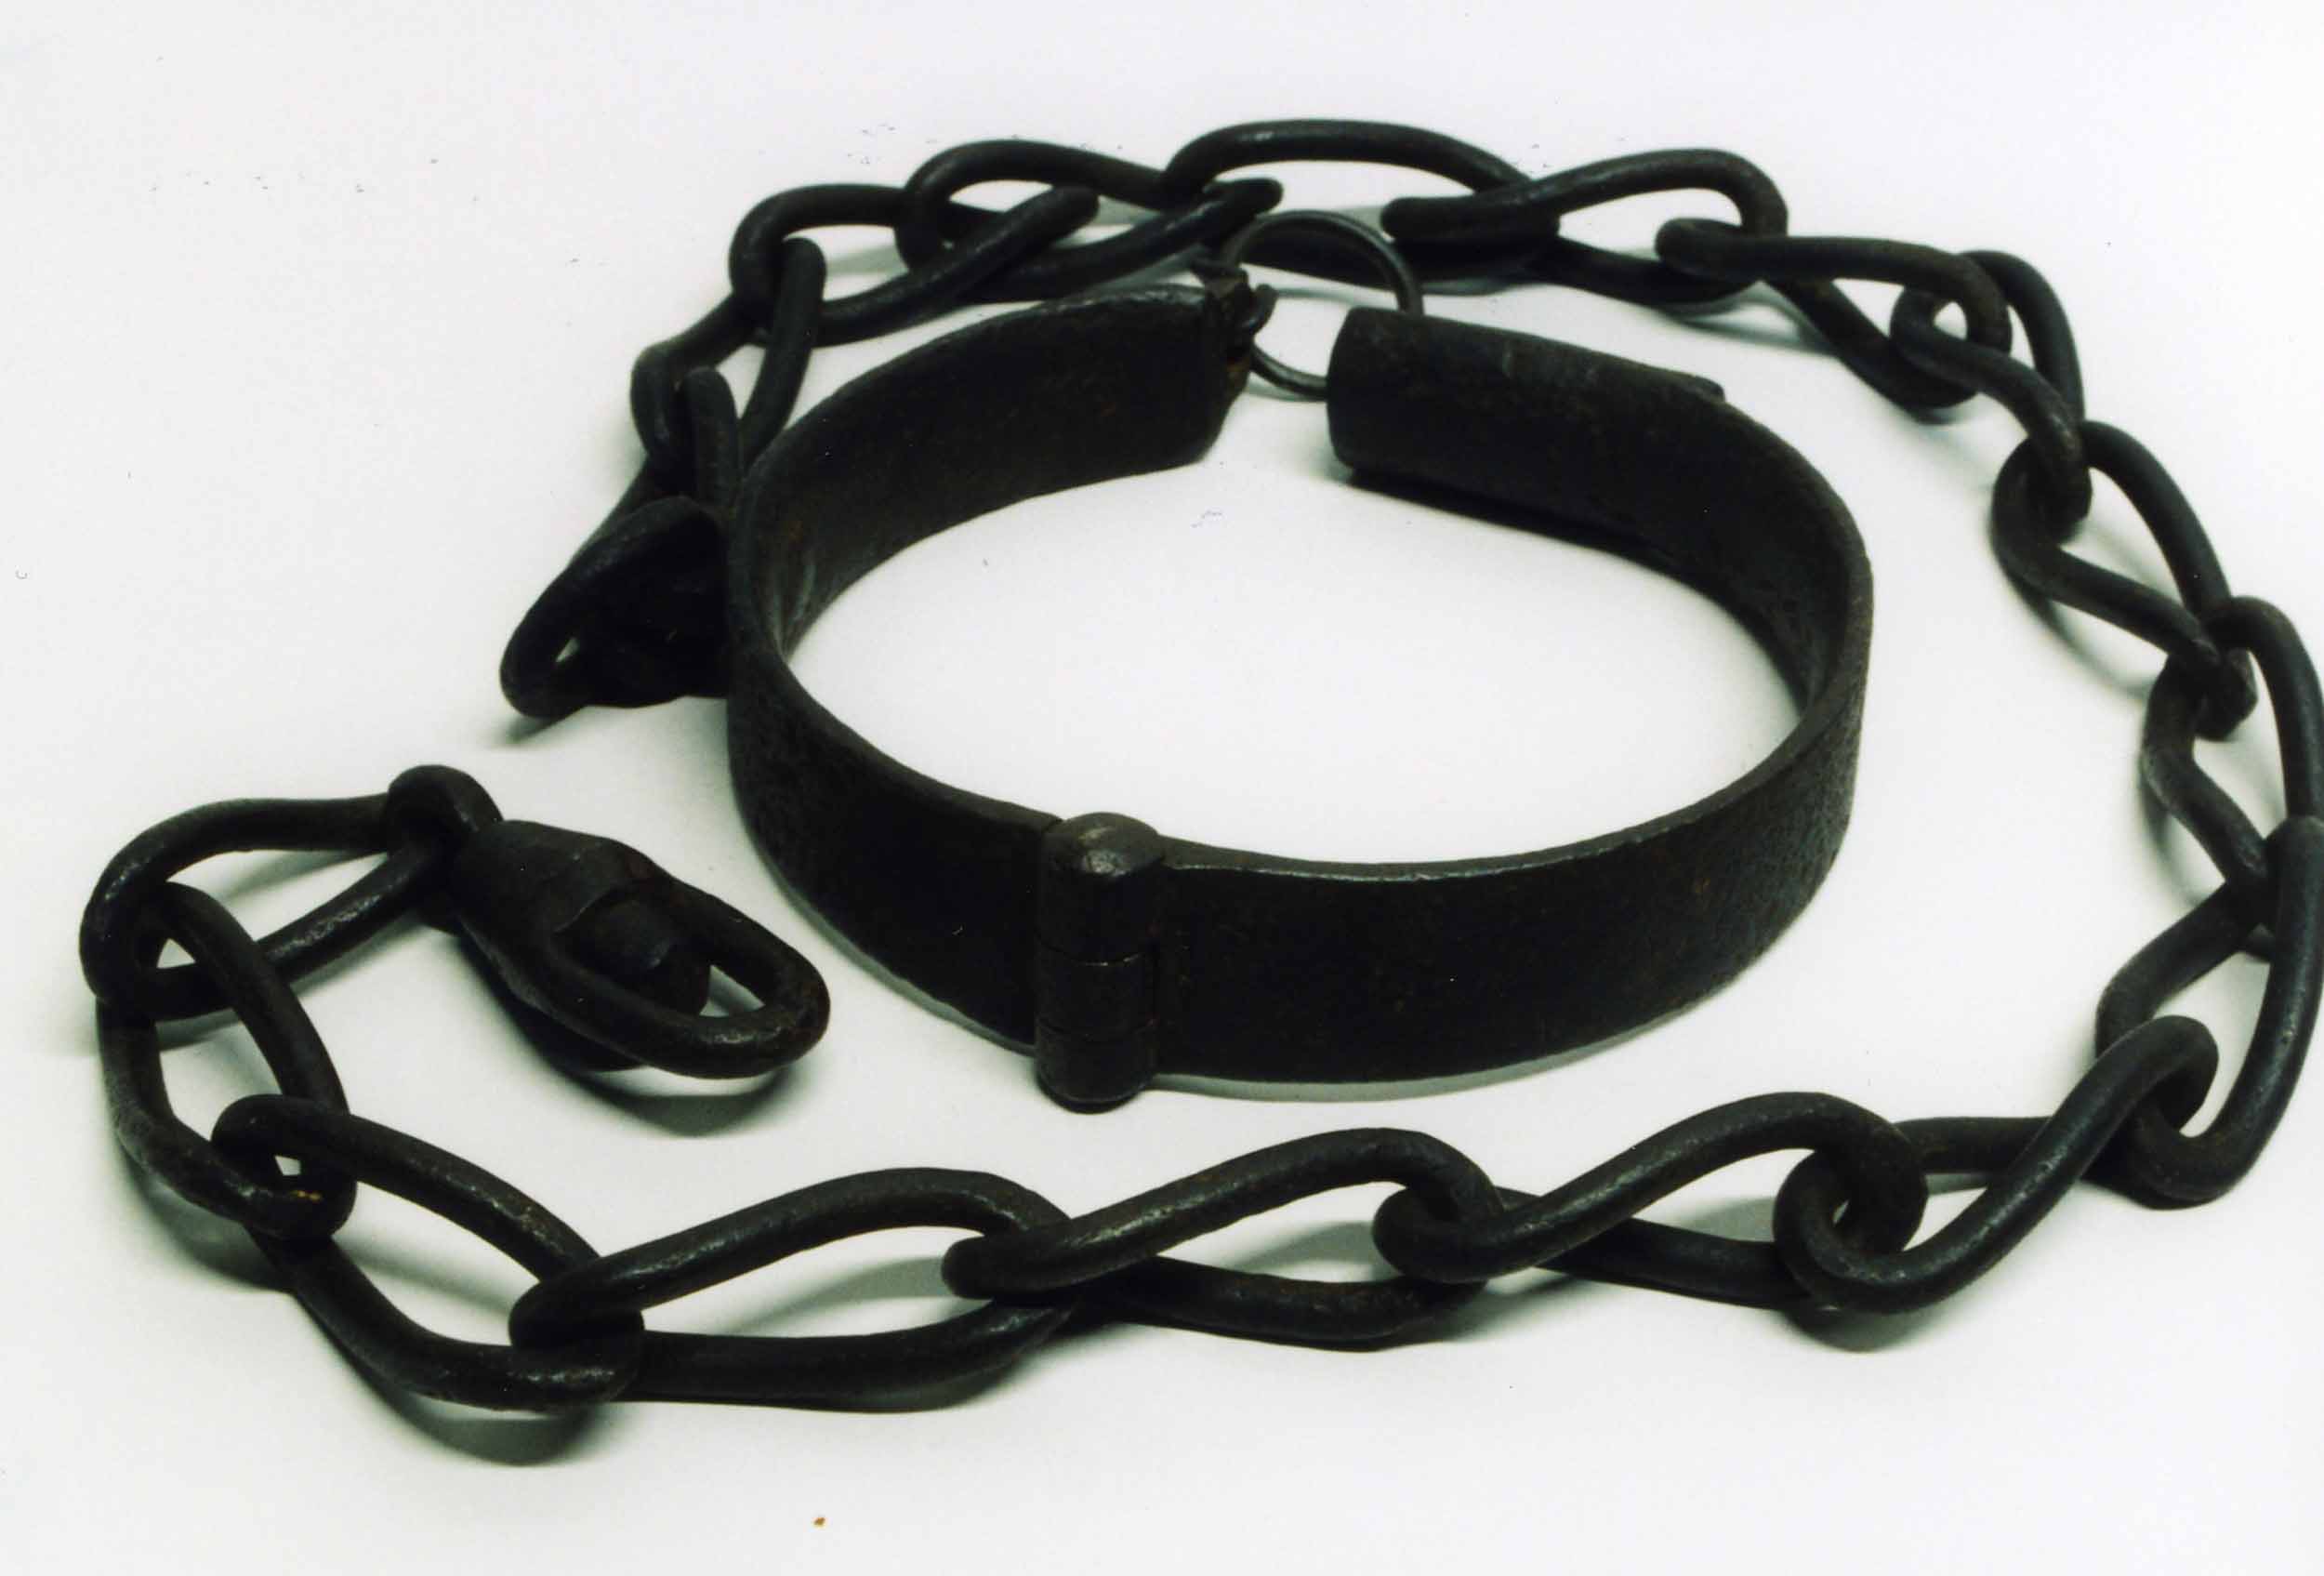 Slave chain for children. Copyright Livingstone Online (Gary Li, photographer). May not be reproduced without the express written consent of the National Trust for Scotland, on behalf of the Scottish National Memorial to David Livingstone Trust (David Livingstone Centre).